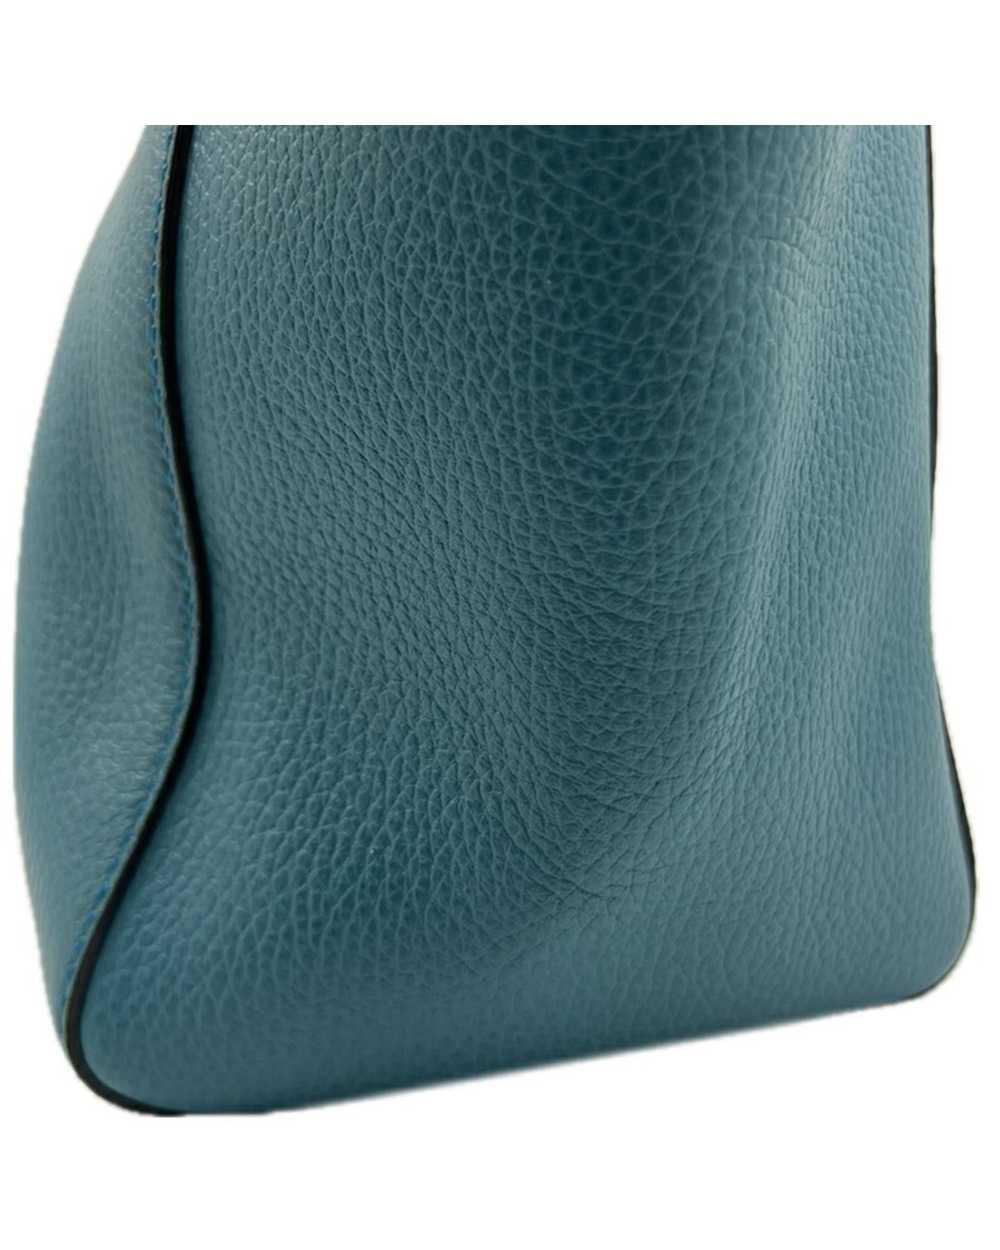 Gucci Blue Leather Swing Bag - image 4